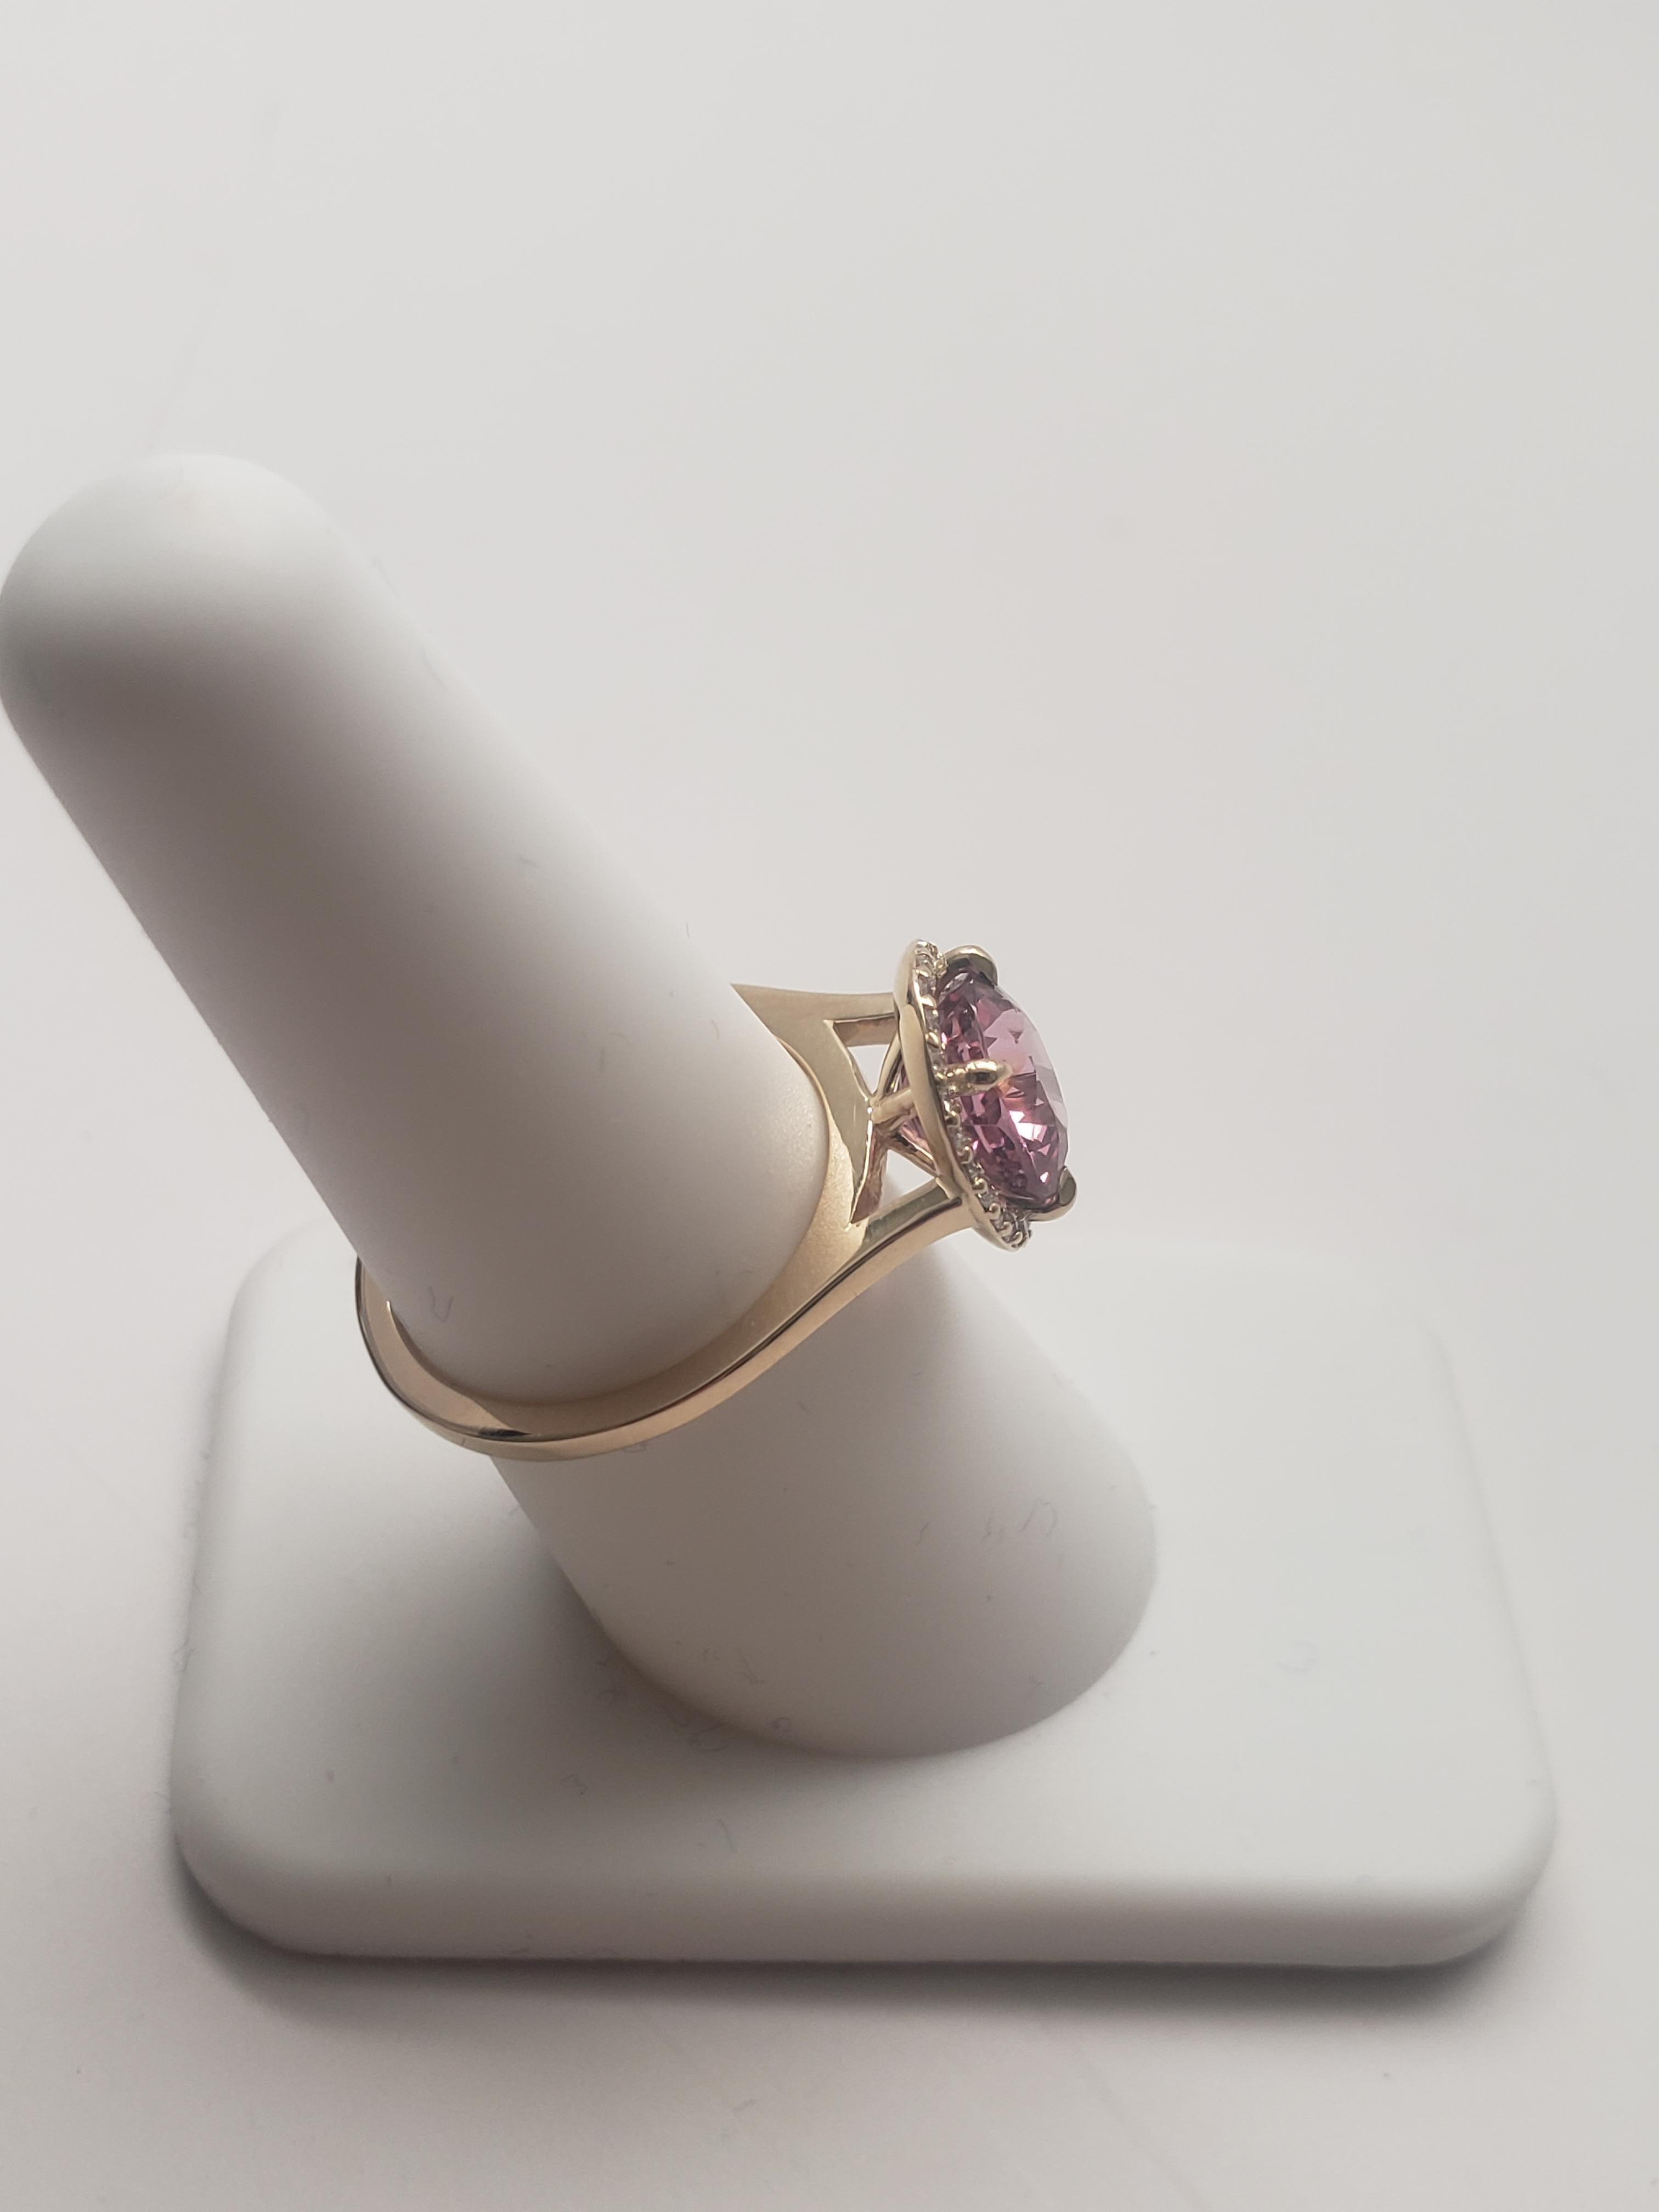 NEW GIA Cert Unheated Natural Oval Pink Spinel Diamond Ring in 14K Yellow Gold For Sale 3